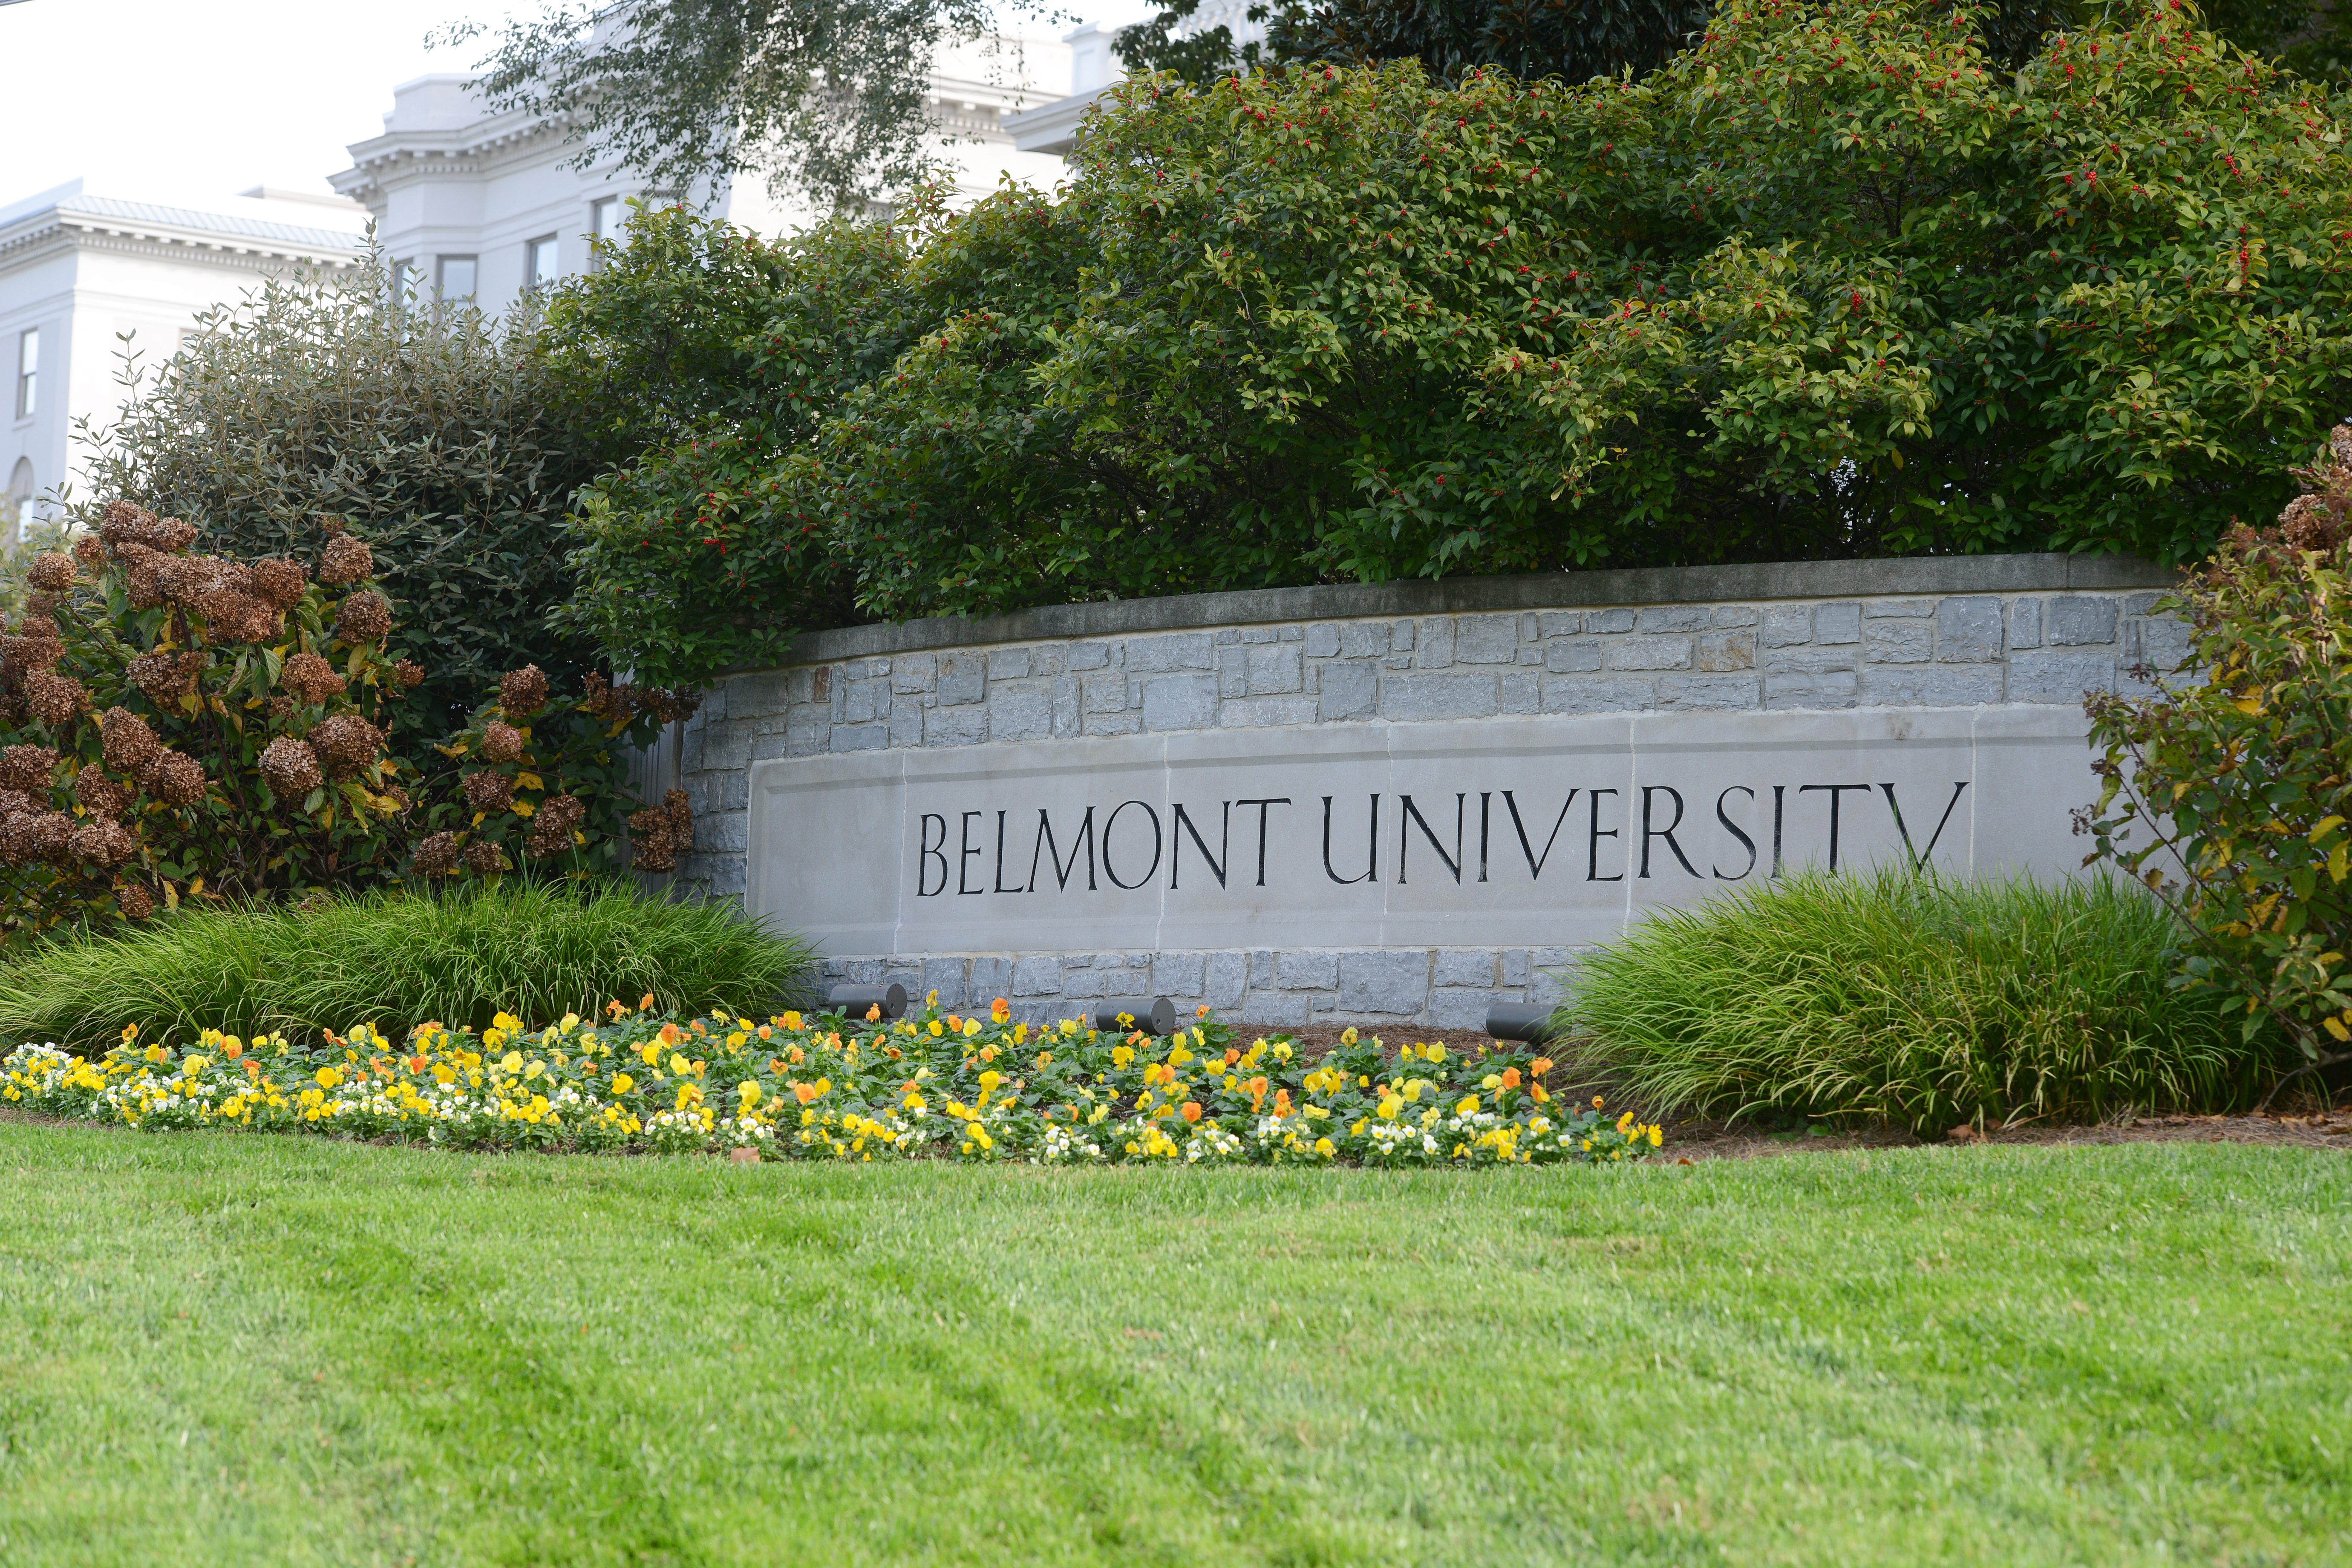 Belmont University's sign, signifying the front of the University's campus